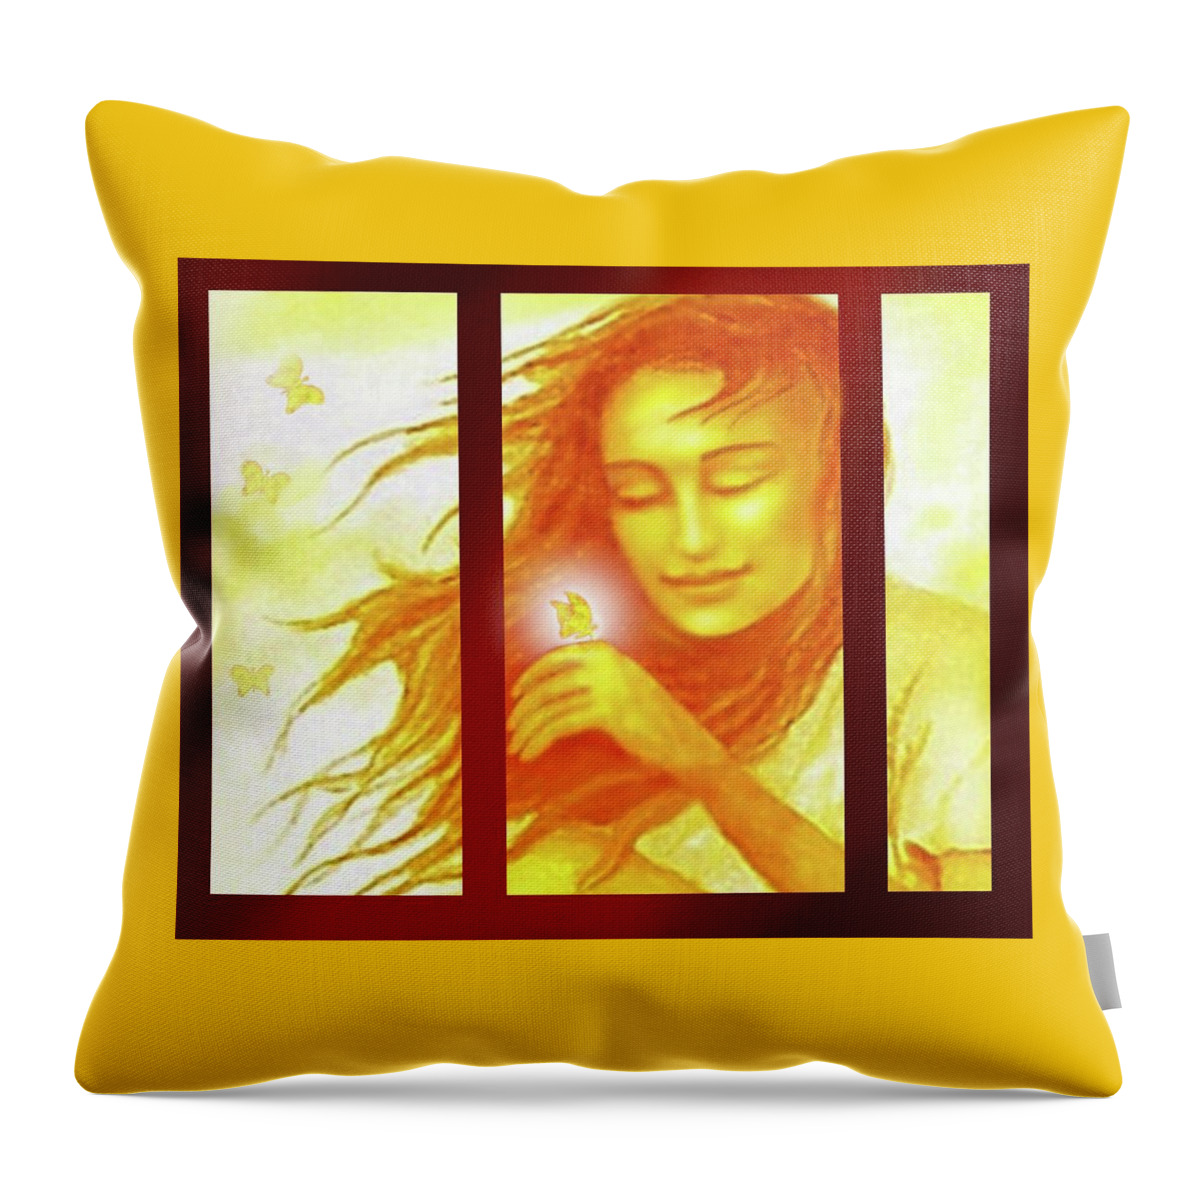 Butterfly Throw Pillow featuring the painting The Butterfly by Hartmut Jager